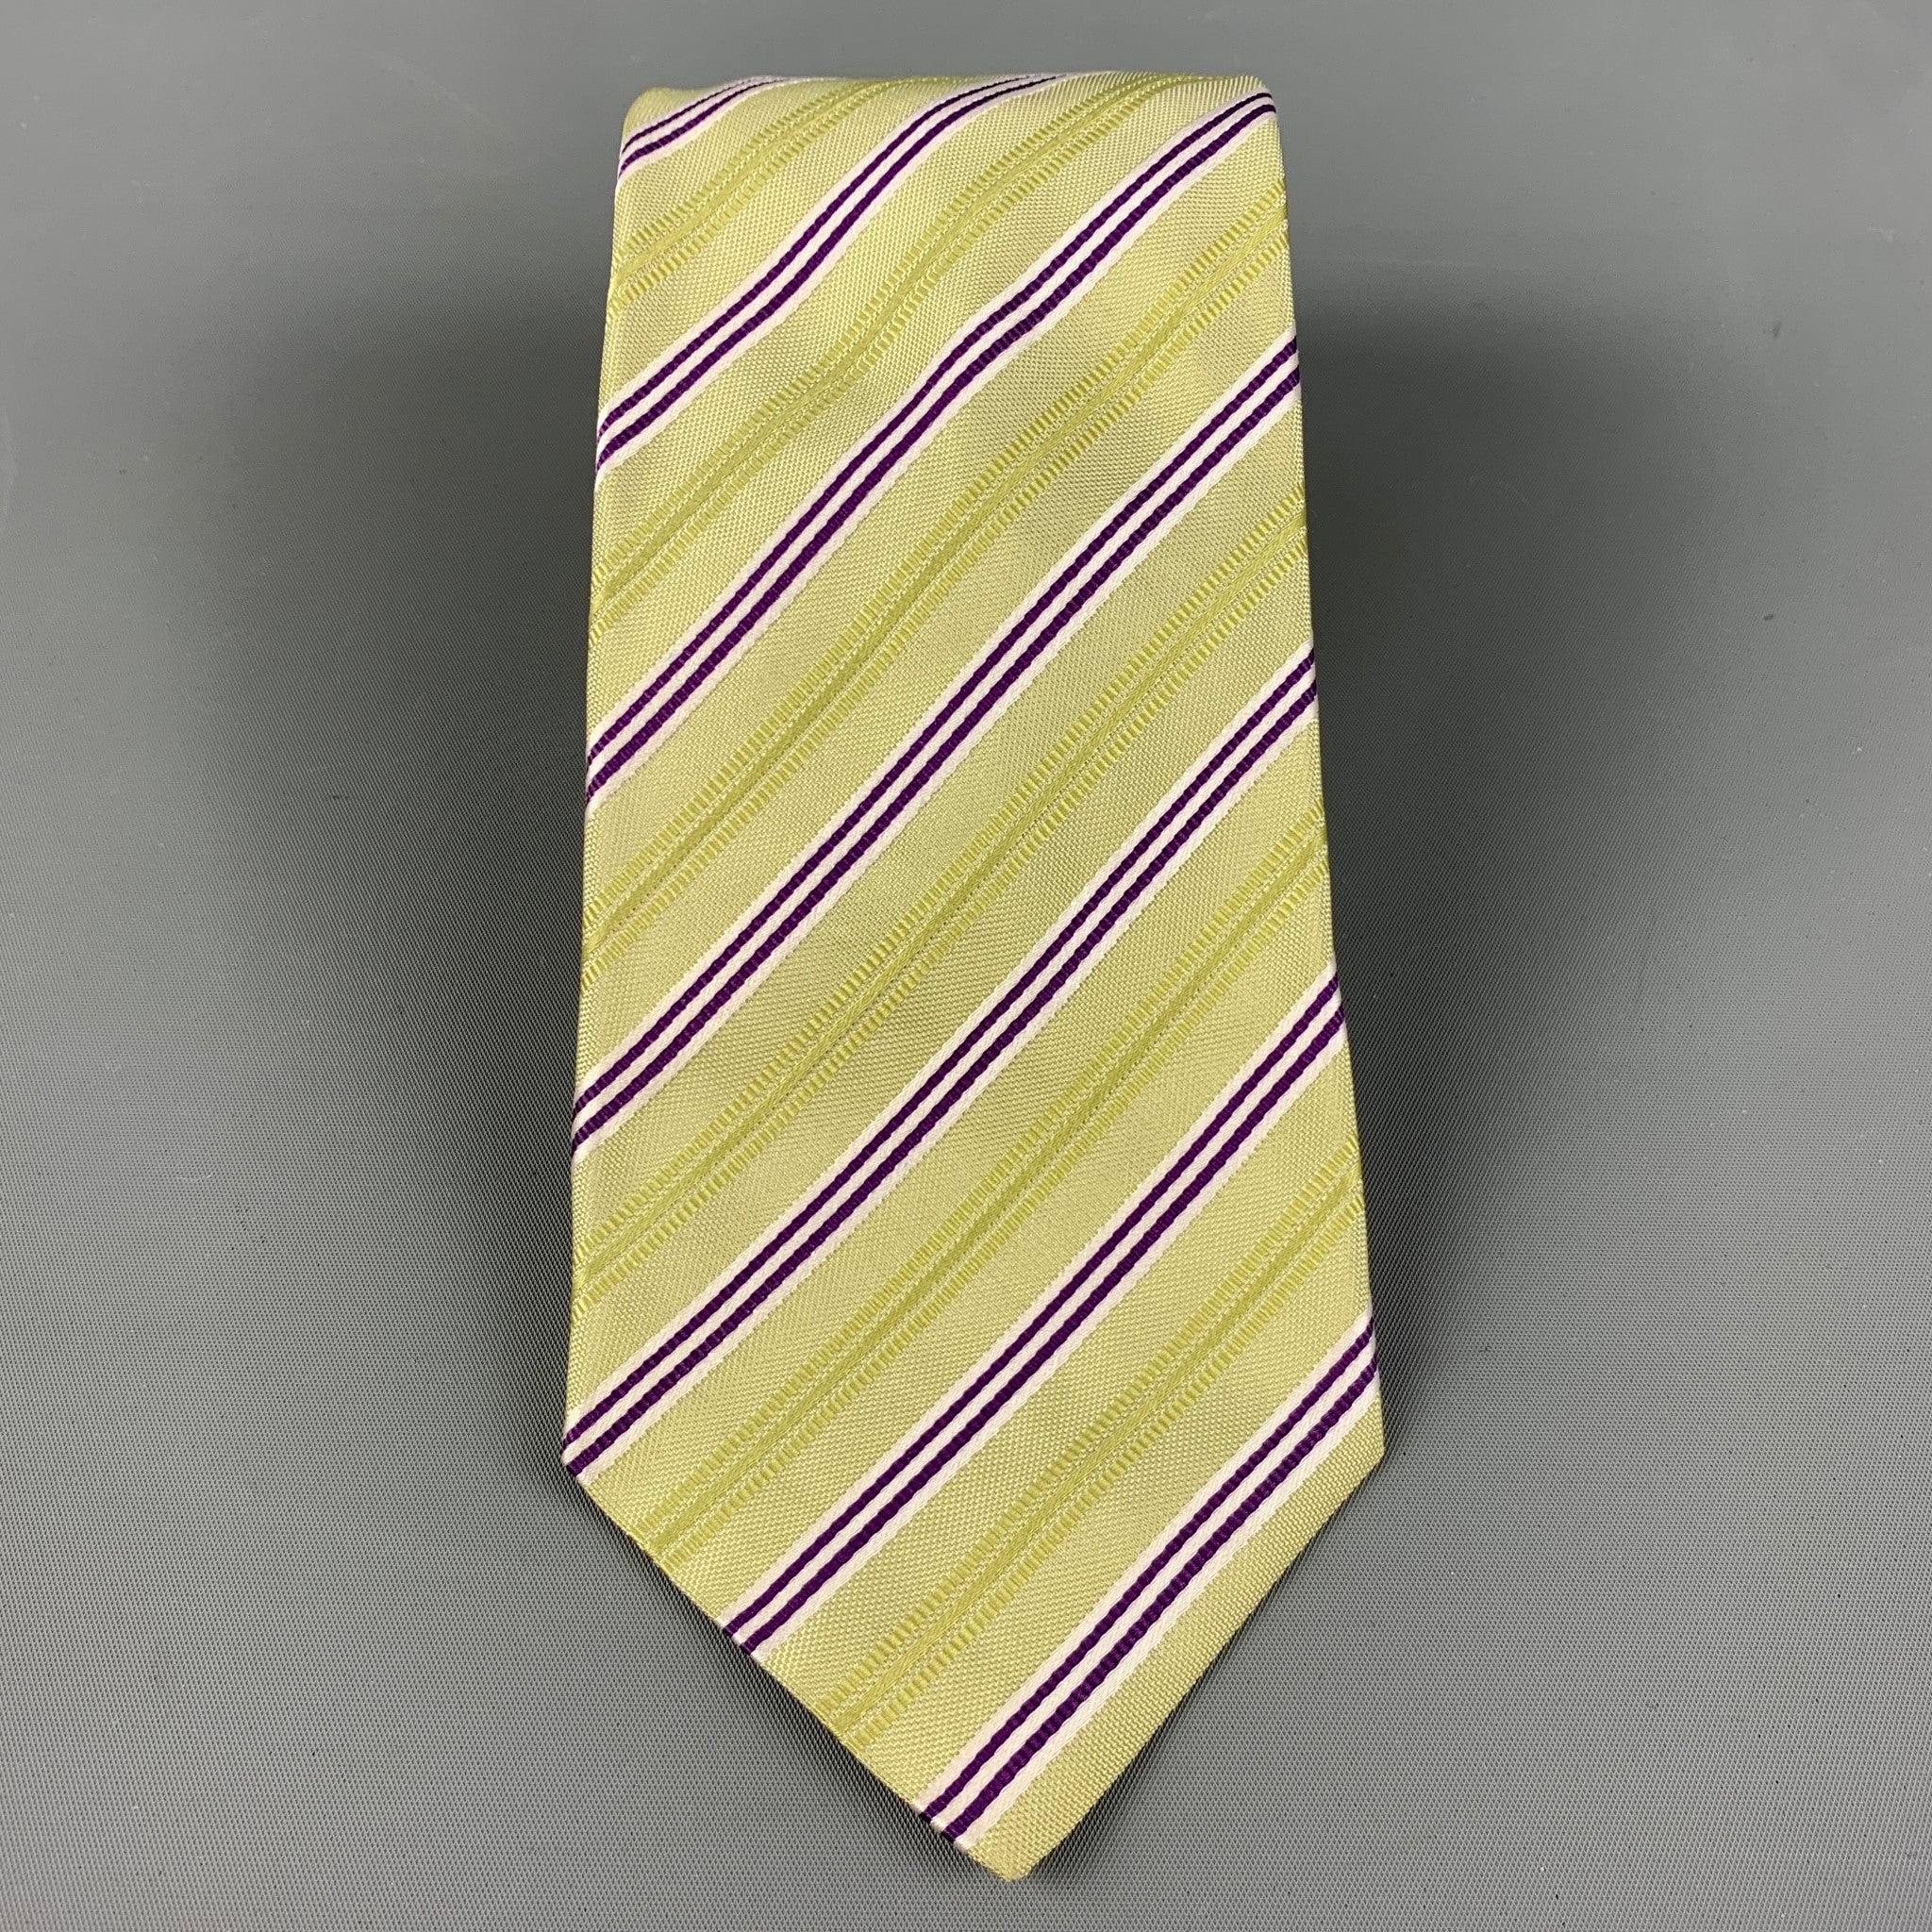 KITON necktie comes in bright green and purple diagonal stripes.
Very Good Pre-Owned Condition.
 

Measurements: 
  
Width:4 inches 
Length:58 inches 

  
  
 
Reference: 124869
Category: Tie
More Details
    
Brand:  KITON
Gender:  Male
Color: 